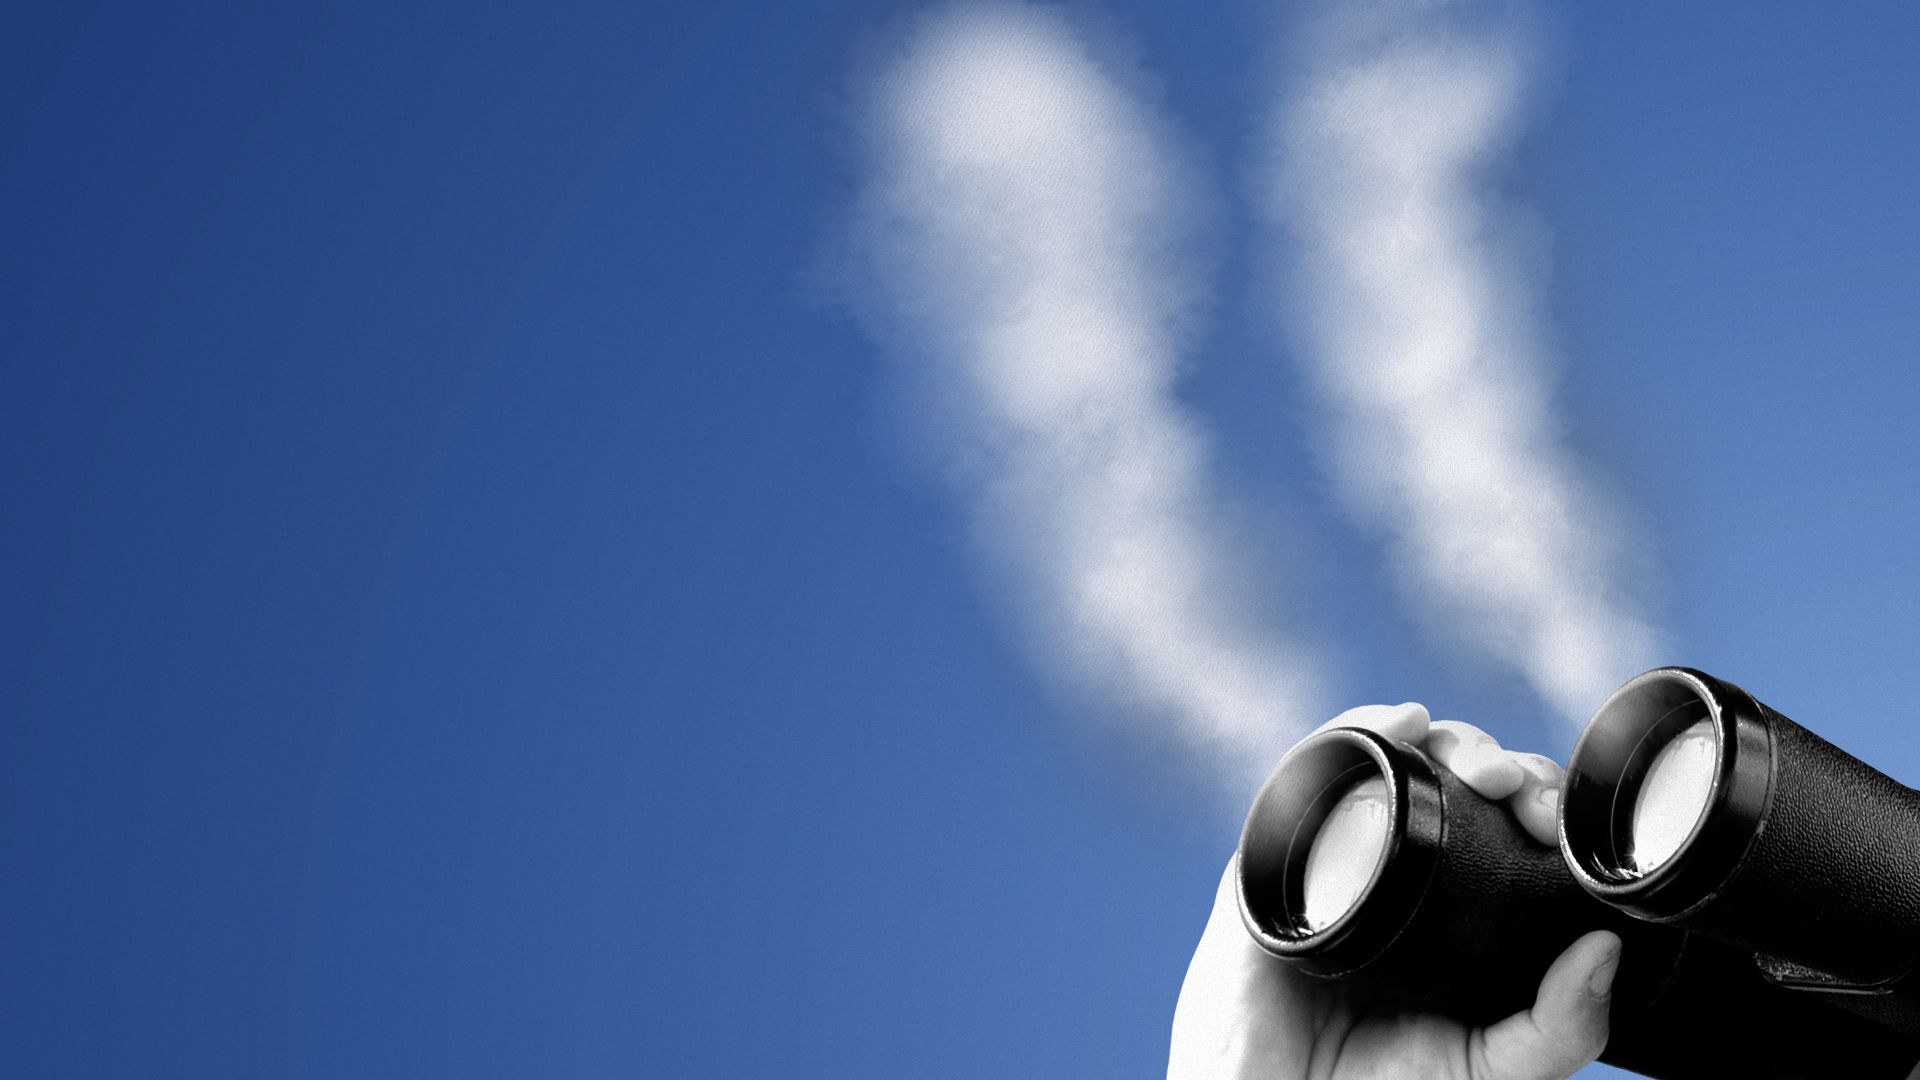 Illustration of smoke coming out of the lenses of binoculars.